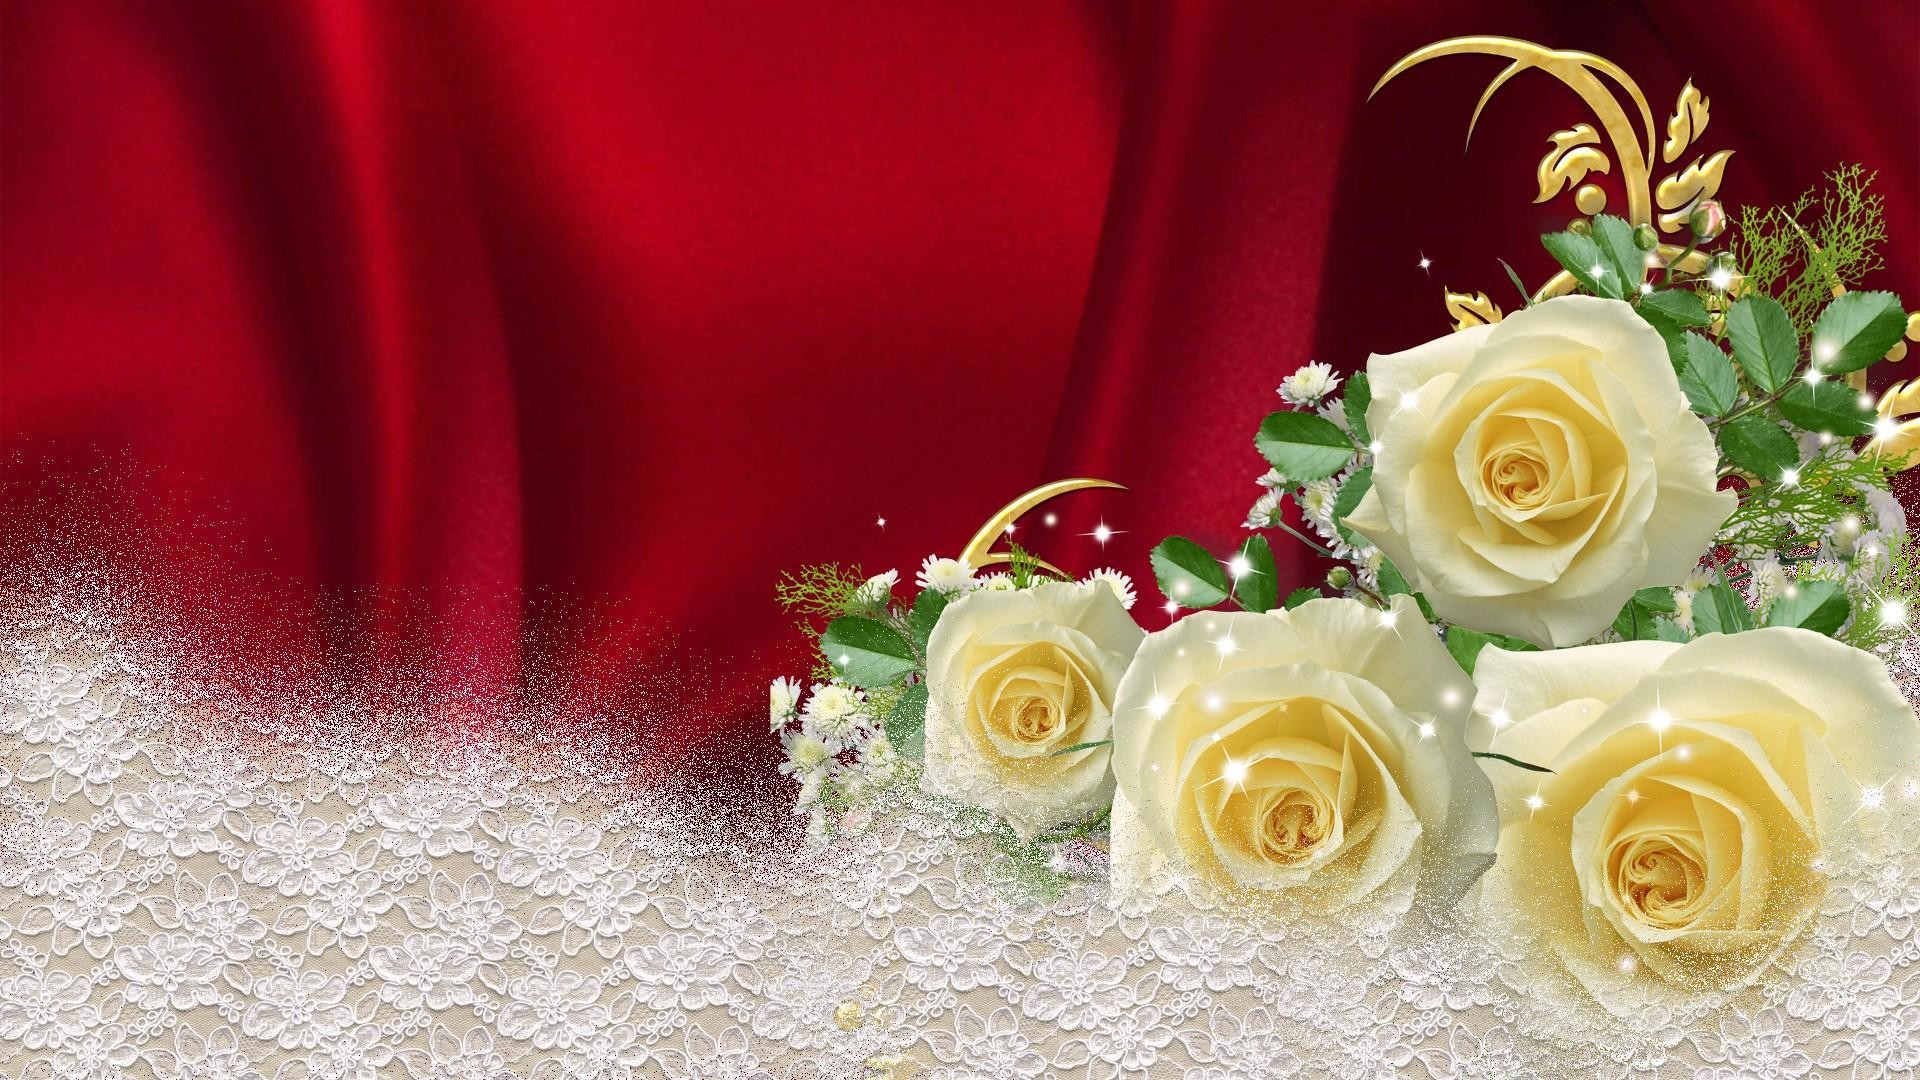 1920x1080 Yellow Roses On Red Satin